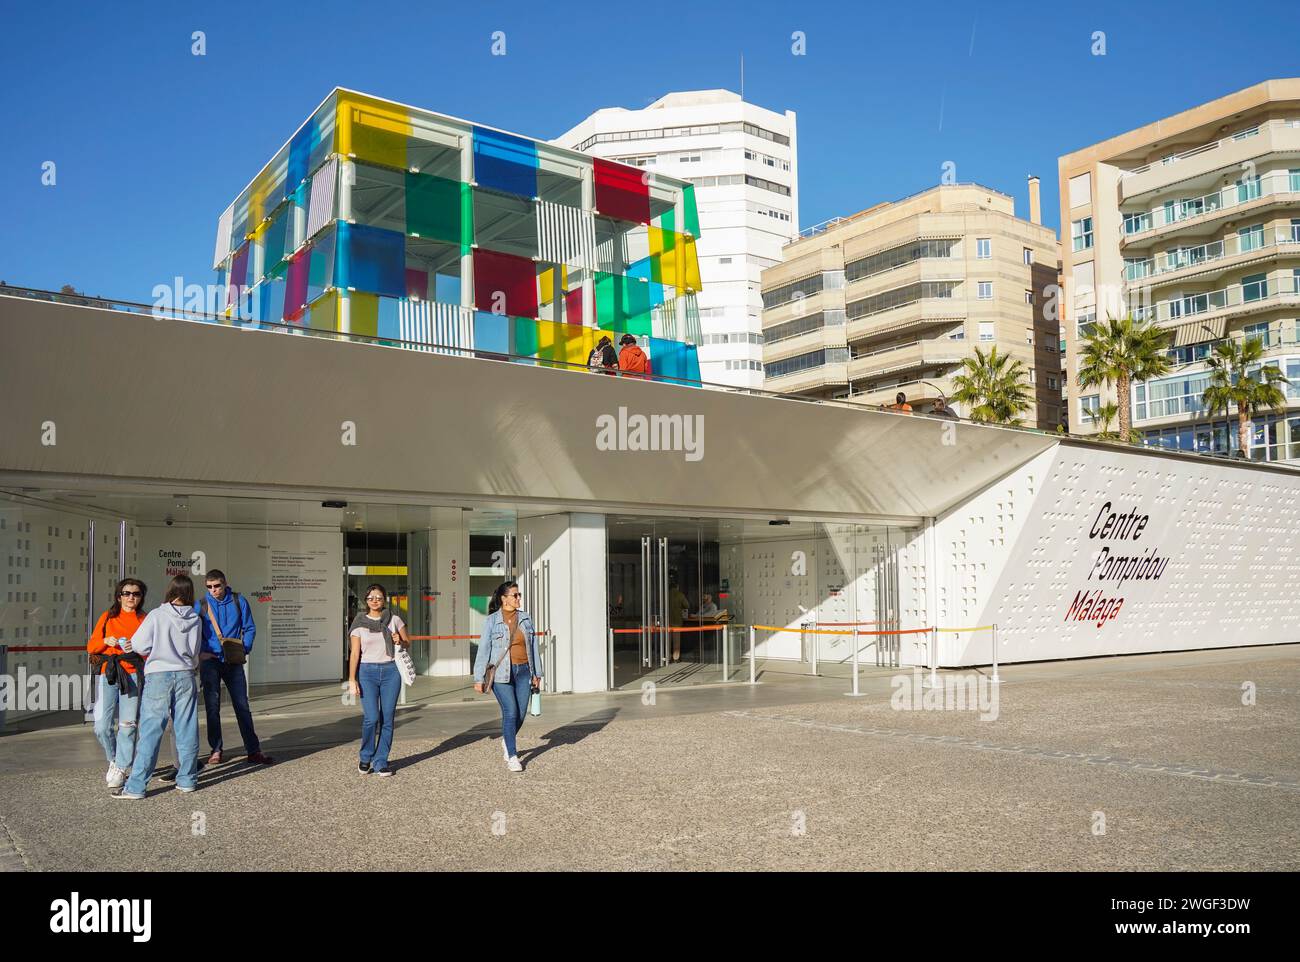 Entrance Pompidou Malaga centre, The Centre Pompidou, the cube, Pop up museum, at Muelle uno, port of Malaga, Andalusia, Spain. Stock Photo